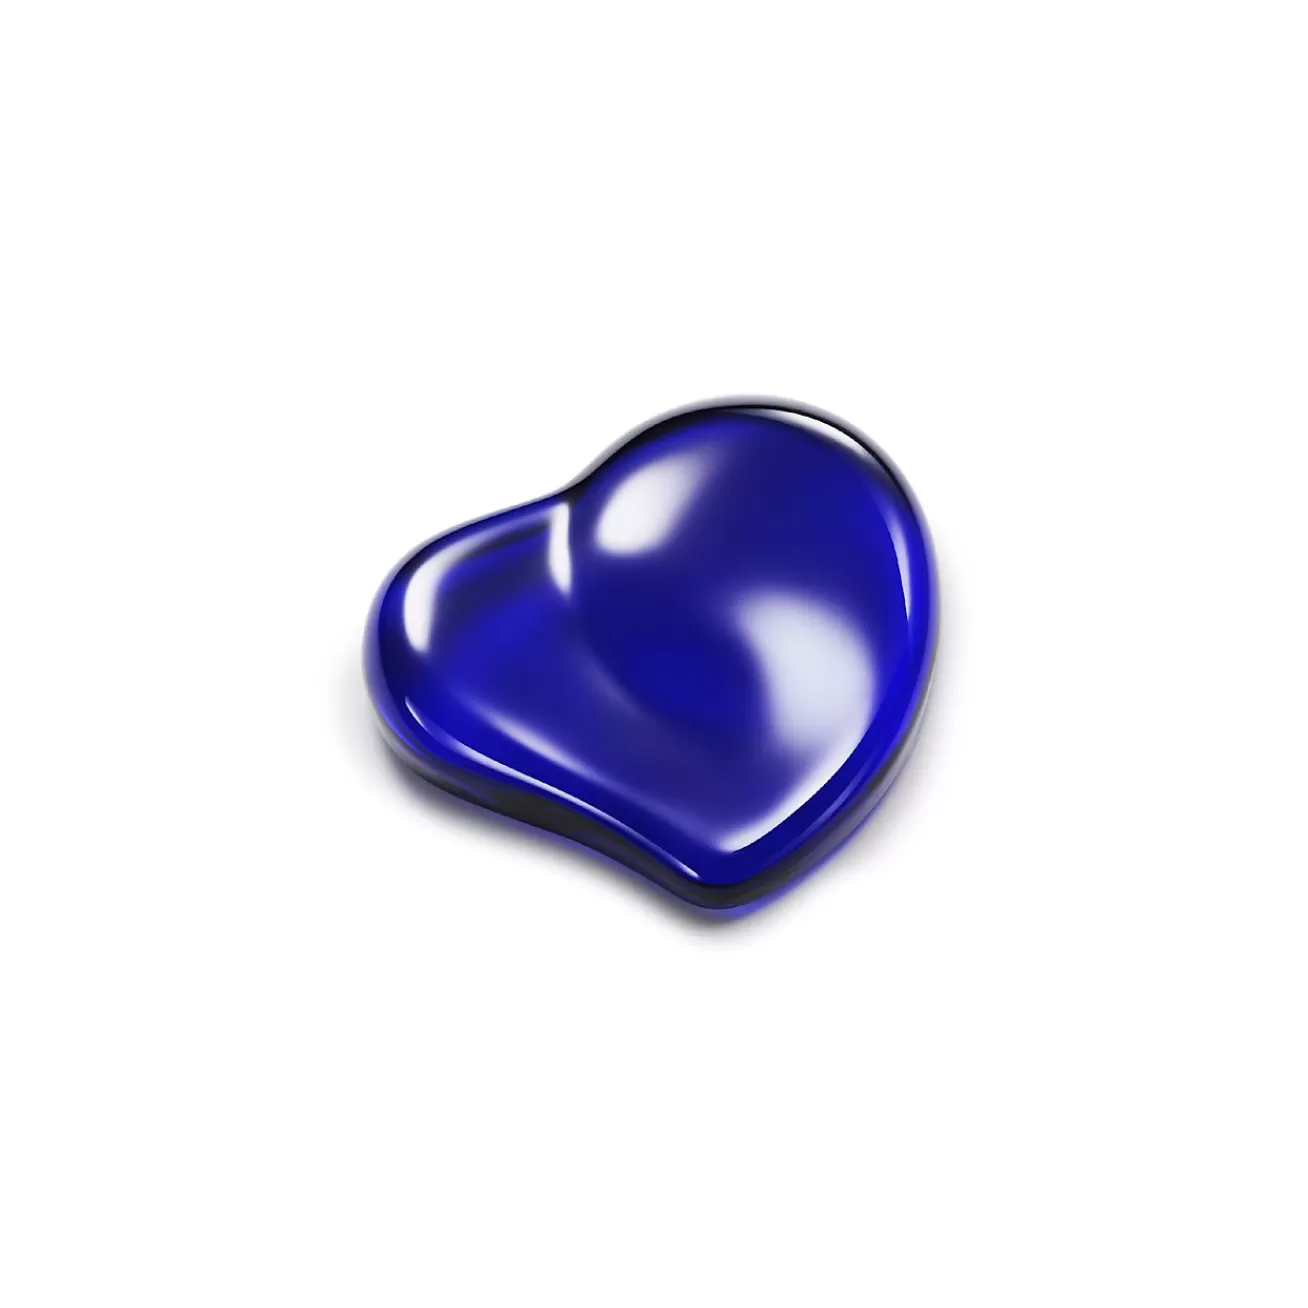 Tiffany & Co. Elsa Peretti® Heart paperweight in cobalt glass. | ^ Stationery, Games & Unique Objects | Games & Novelties